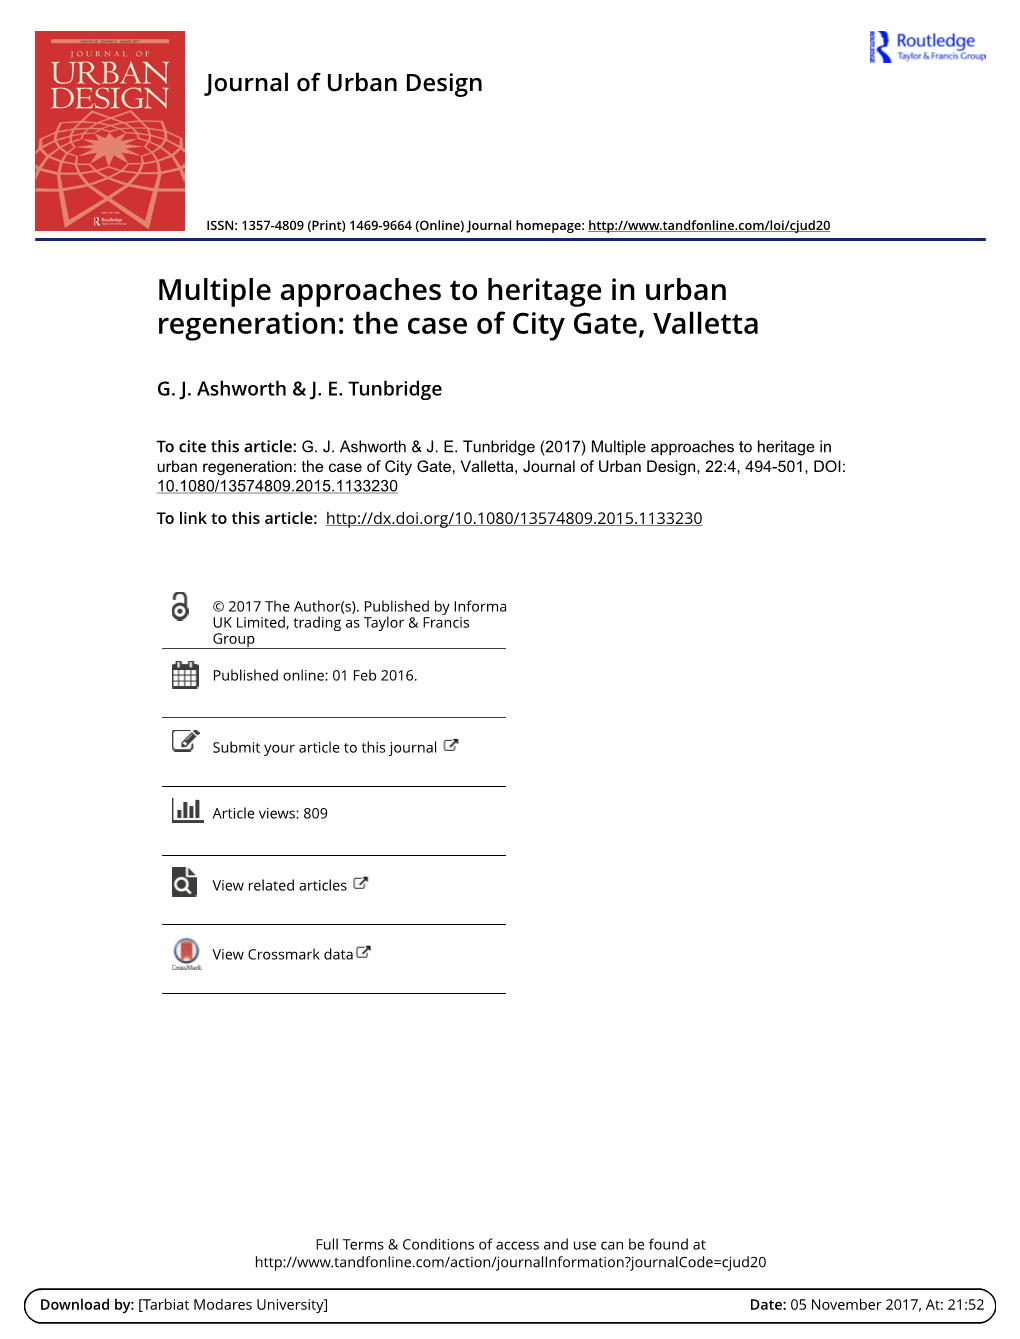 Multiple Approaches to Heritage in Urban Regeneration: the Case of City Gate, Valletta